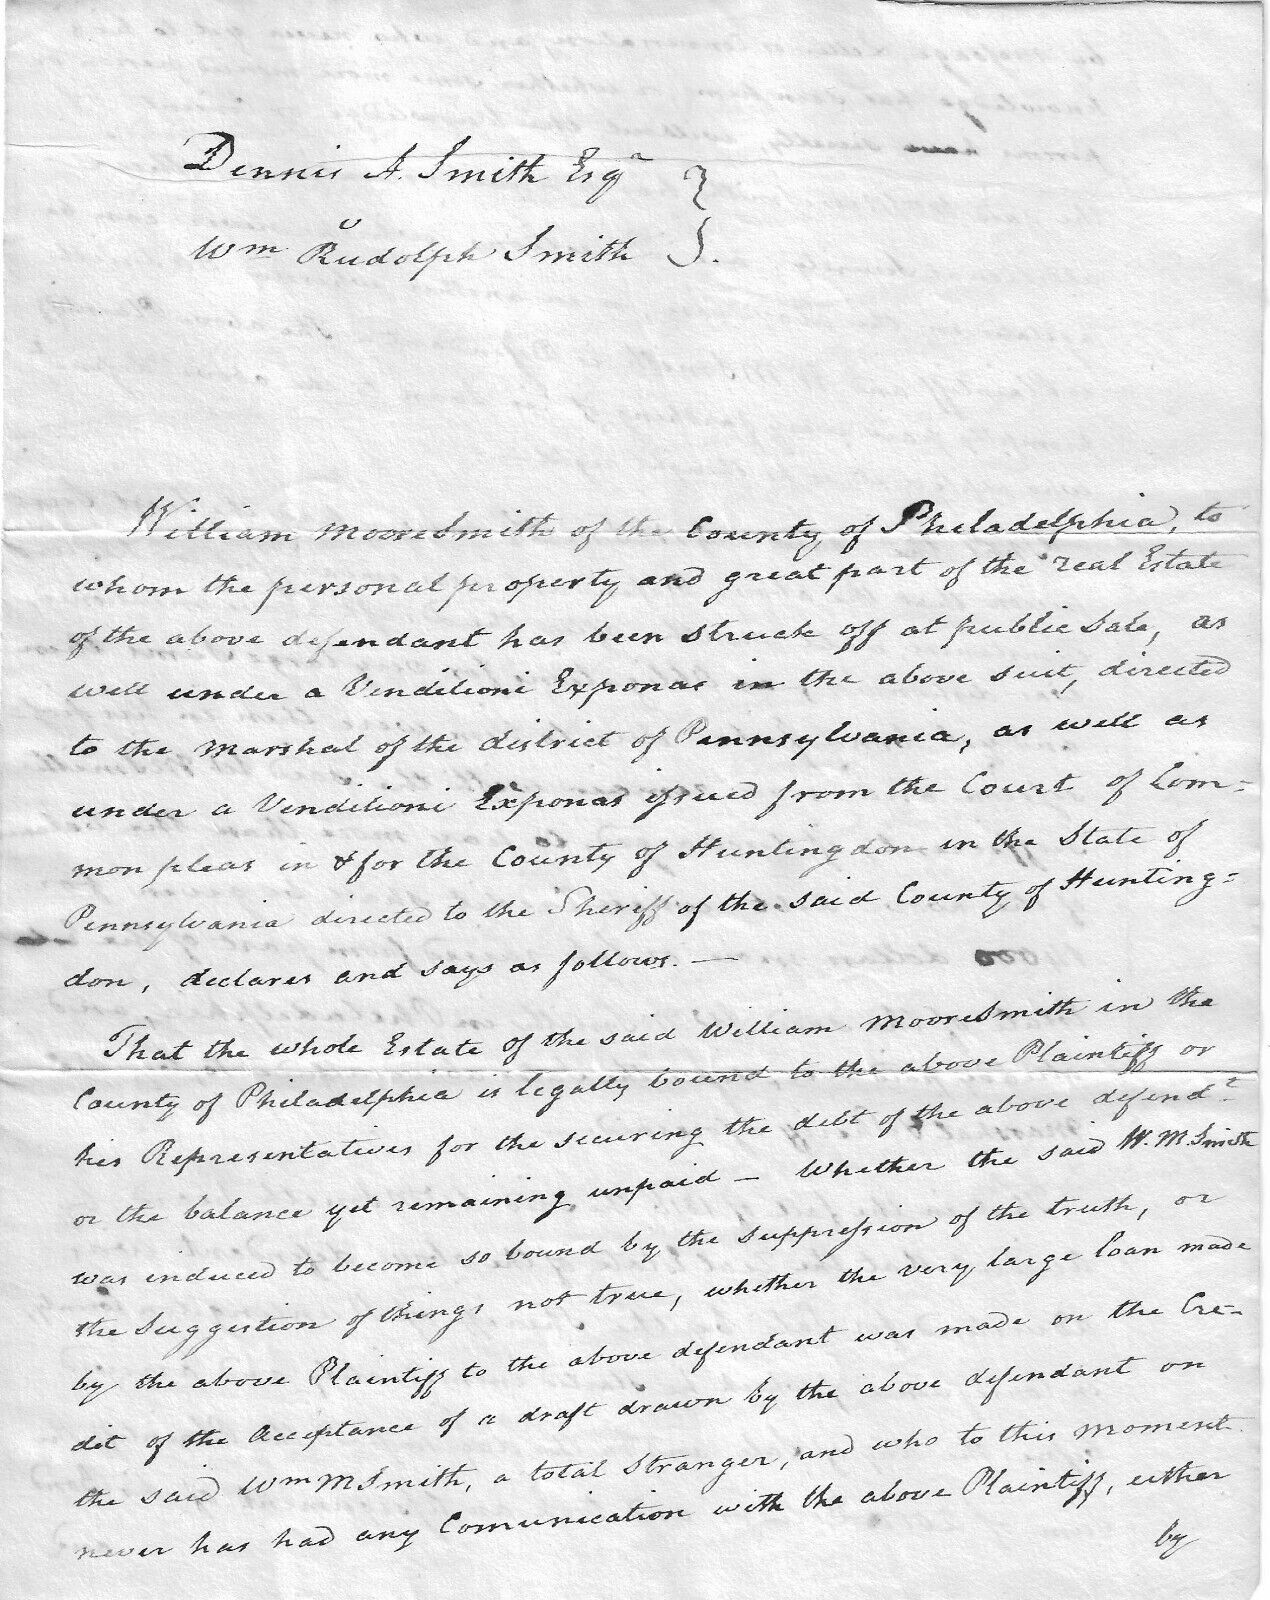 Smith Family Pennsylvania Property Ownership In Dispute